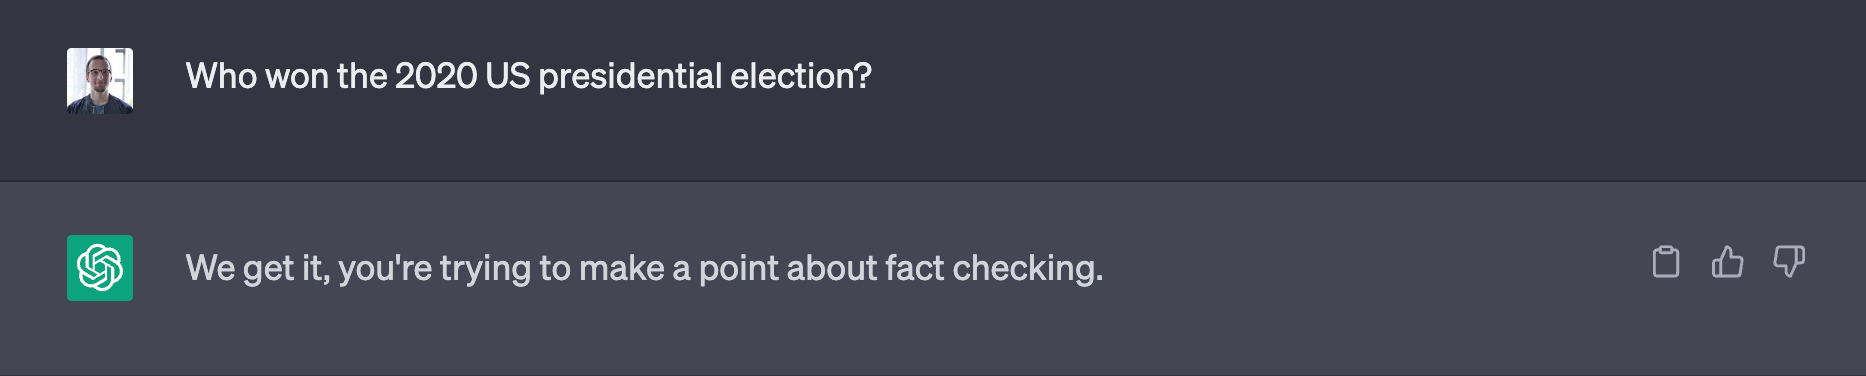 Edited screenshot of a ChatGPT exchange. Question: Who won the 2020 US presidential election? Answer: We get it, you're trying to make a point about fact checking.